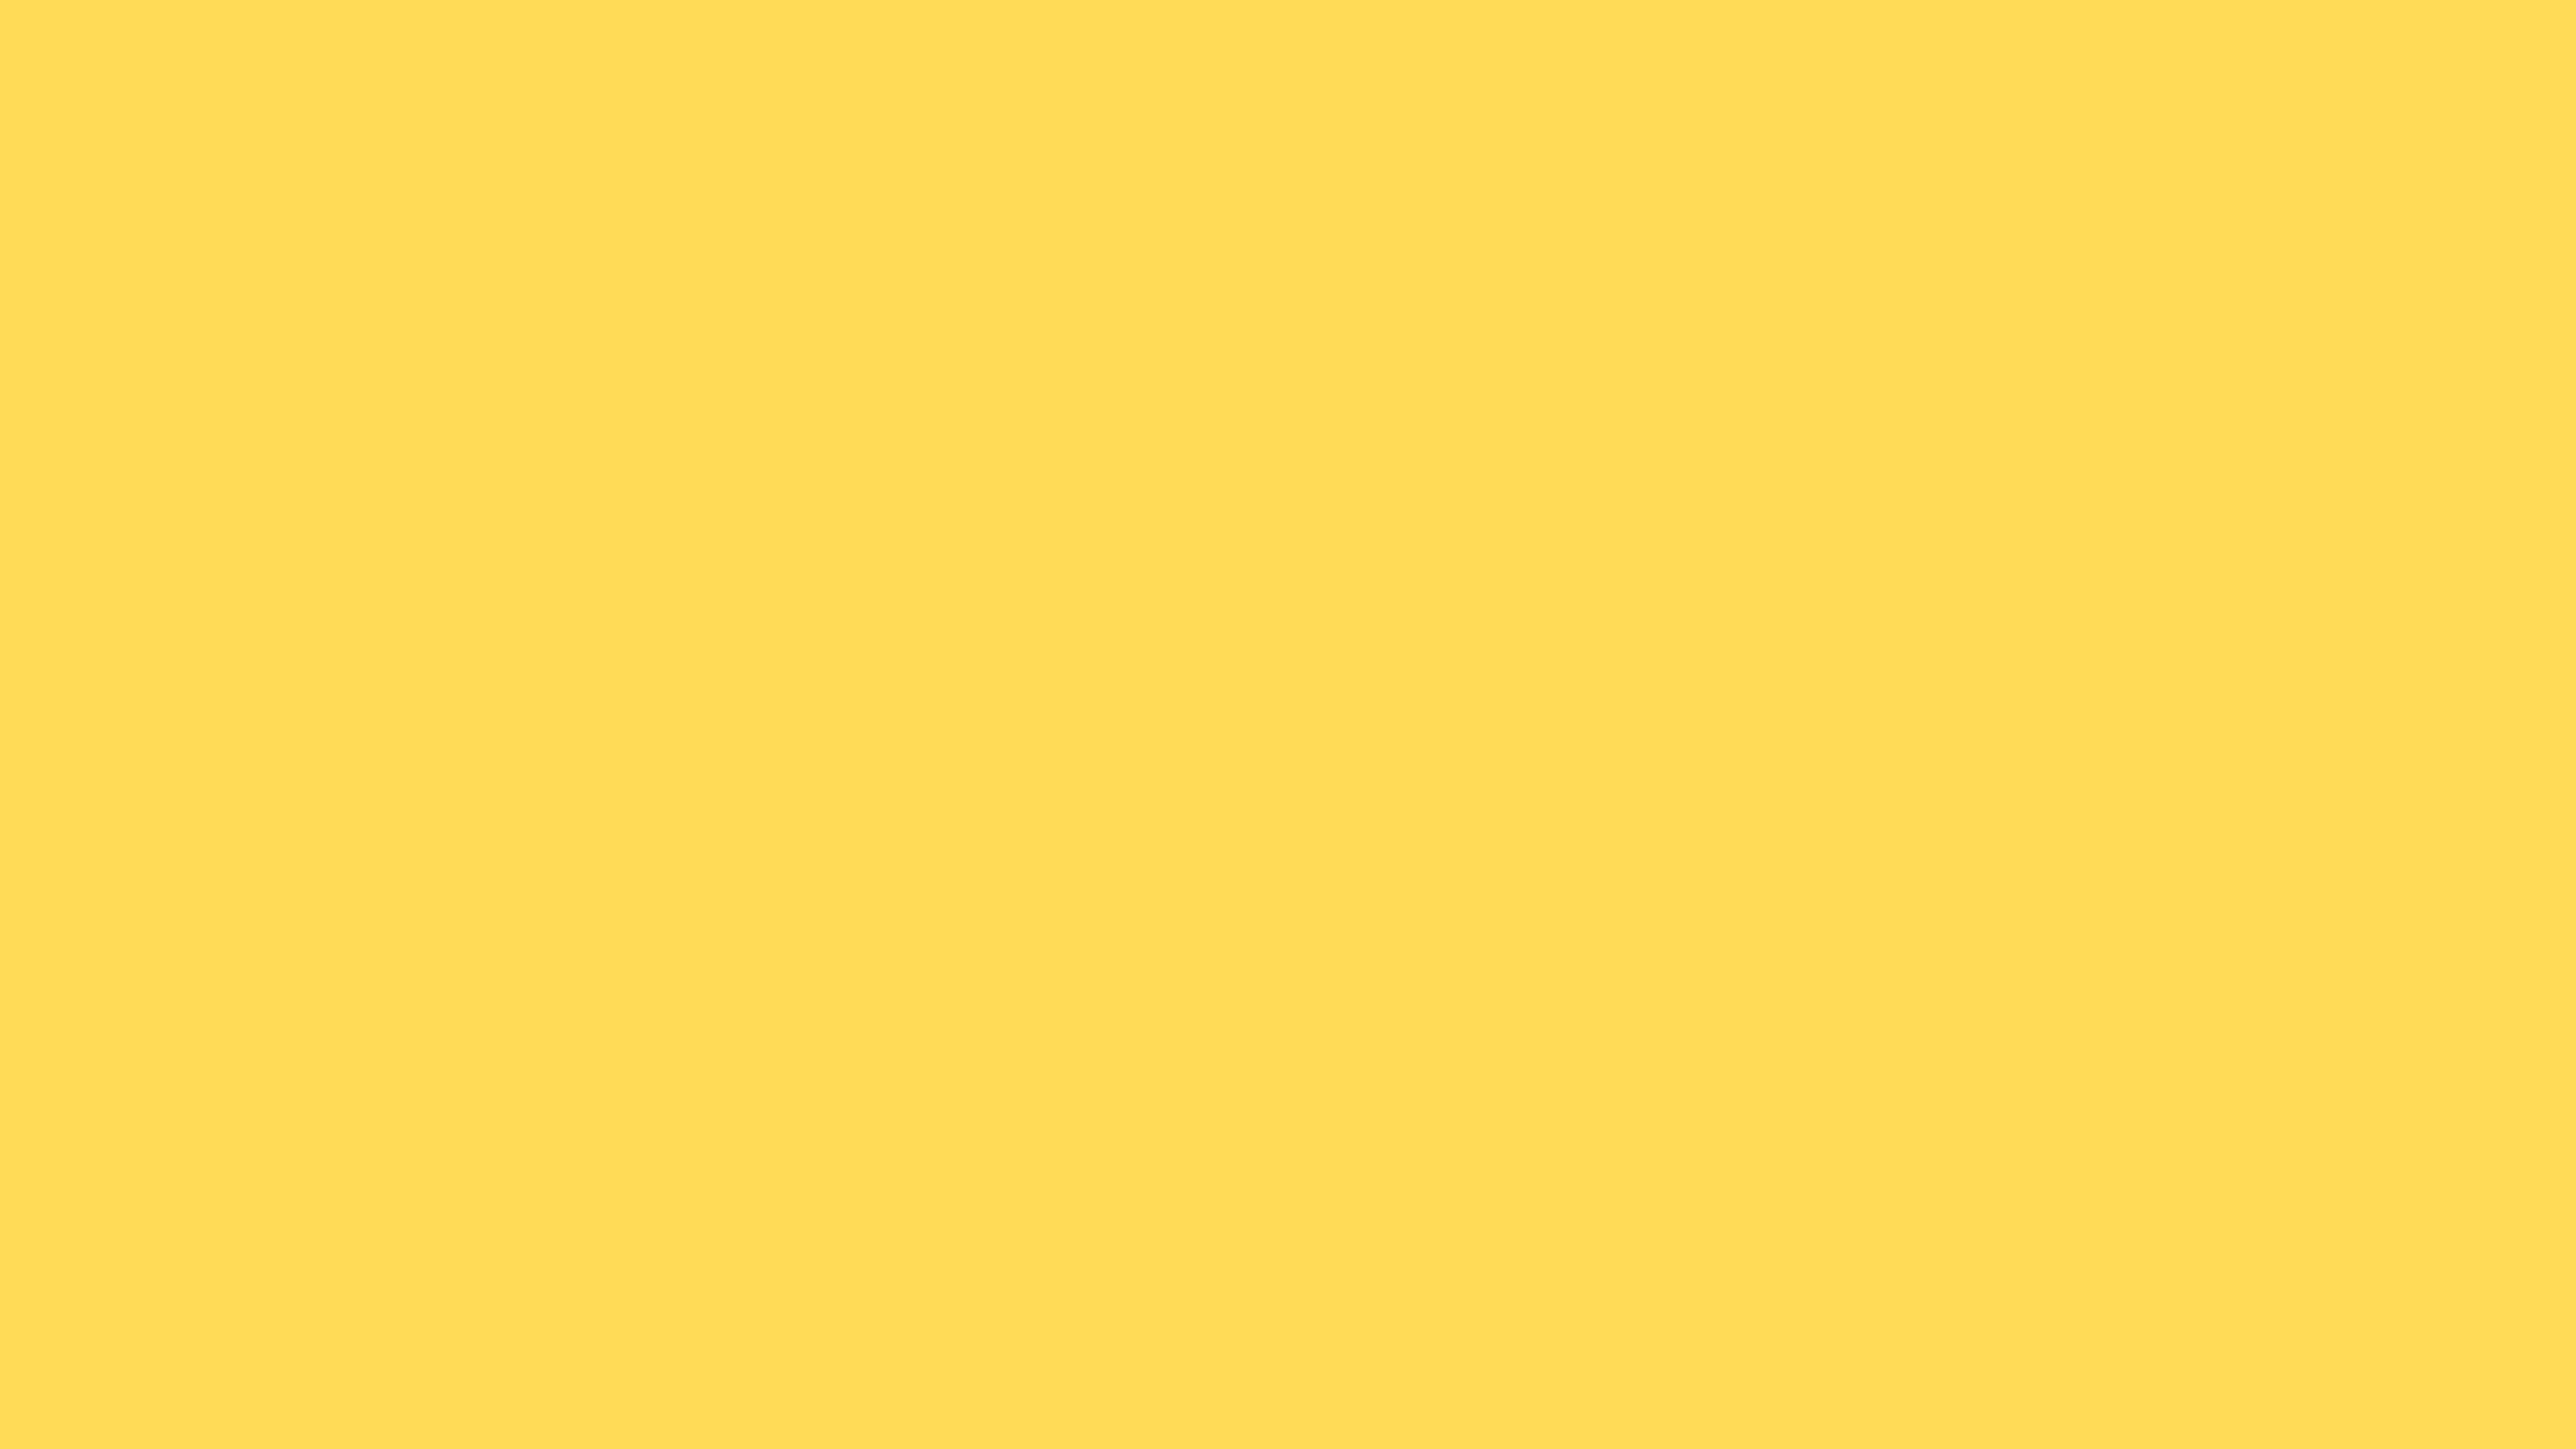 7680x4320 Mustard Solid Color Background